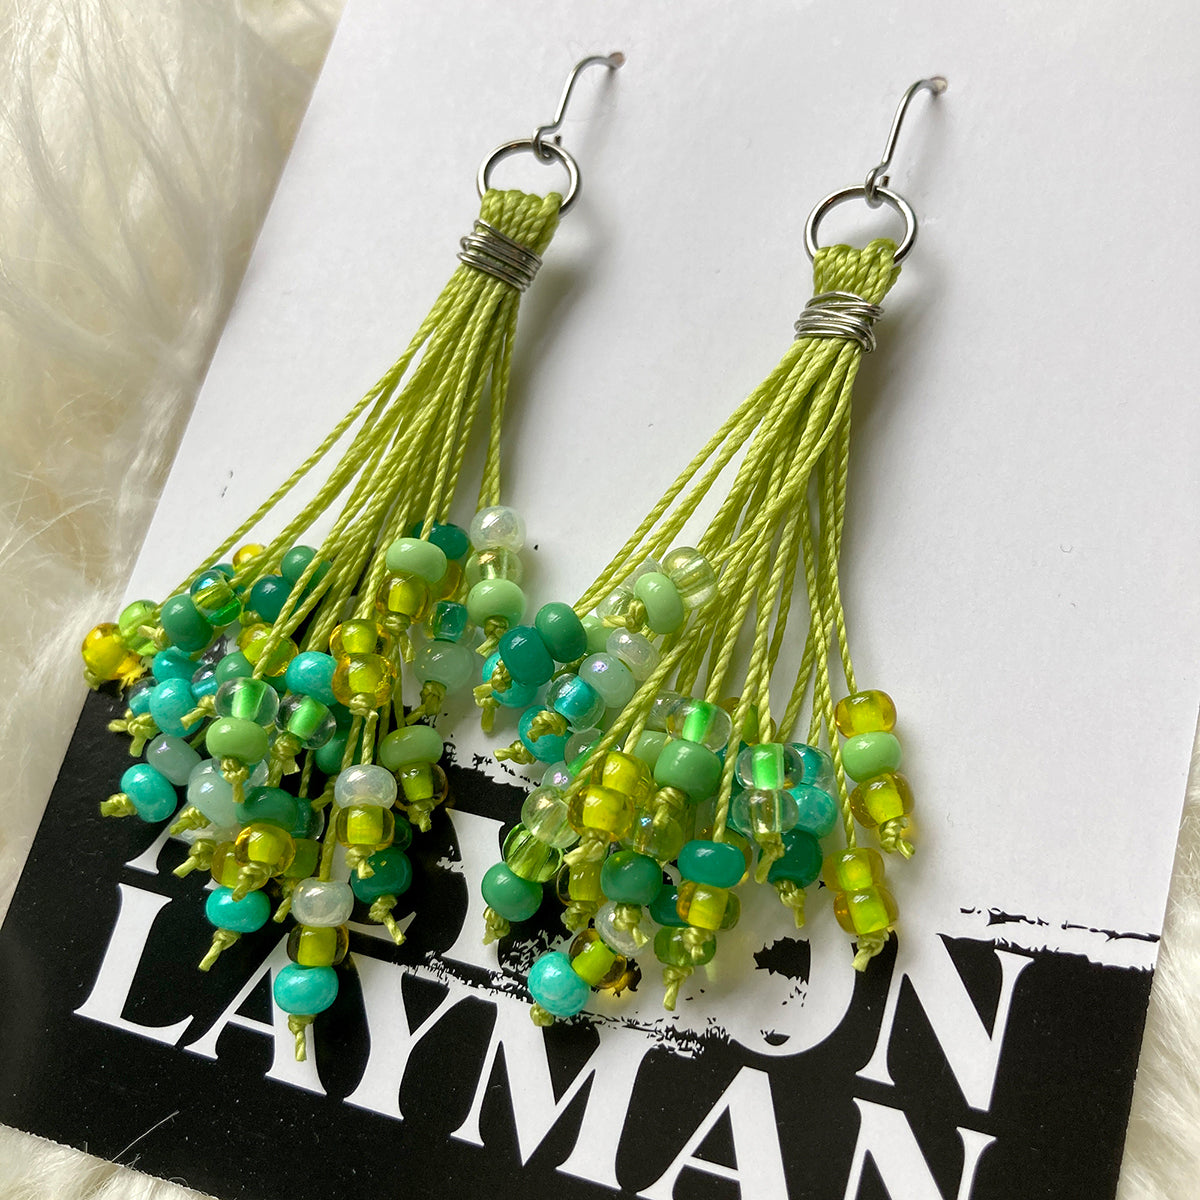 Robin's Jewelry - These beaded Jellyfish earrings feature